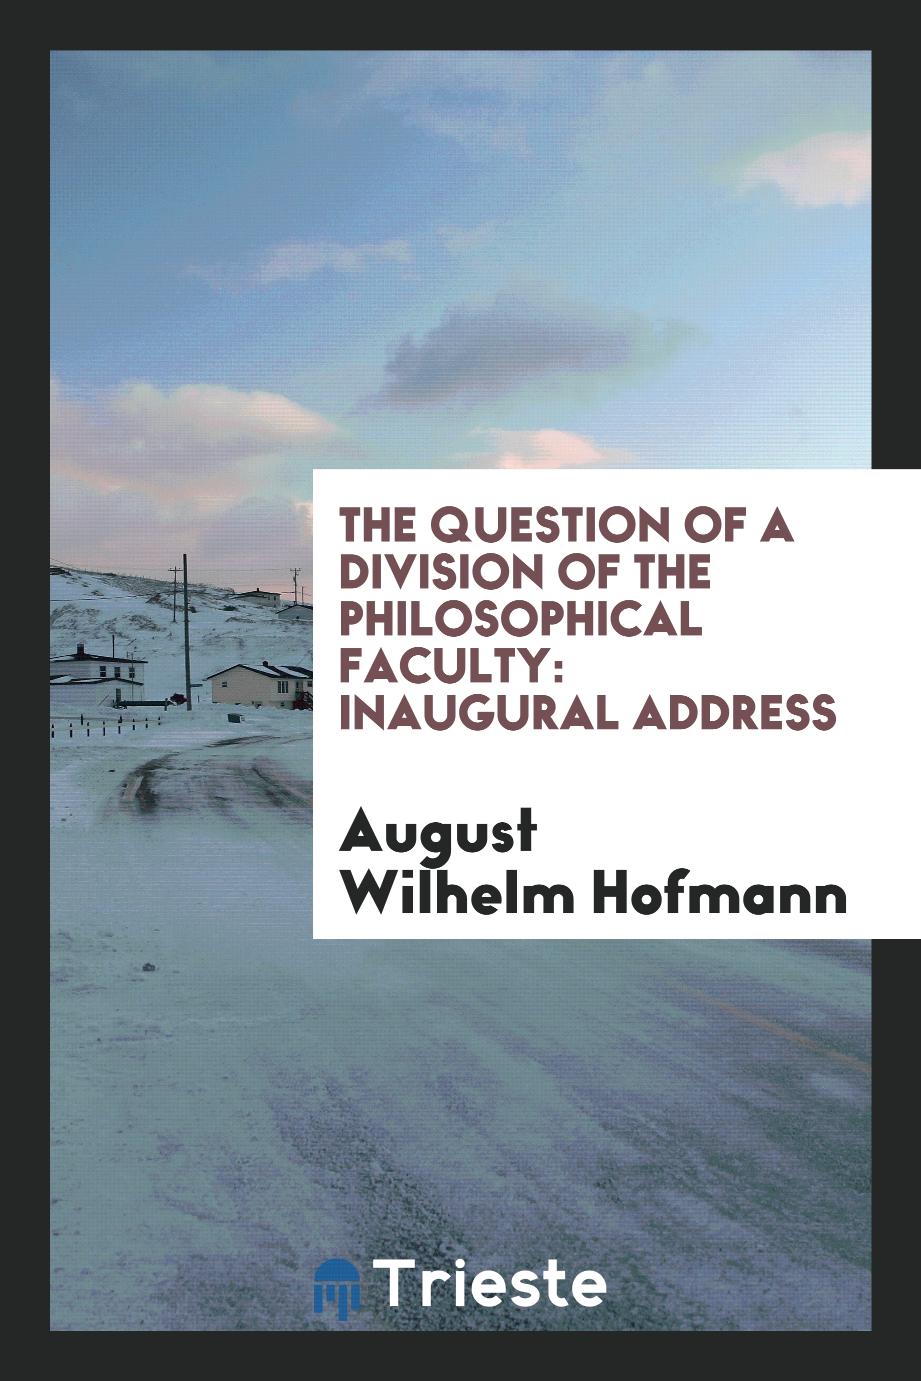 The Question of a Division of the Philosophical Faculty: Inaugural address